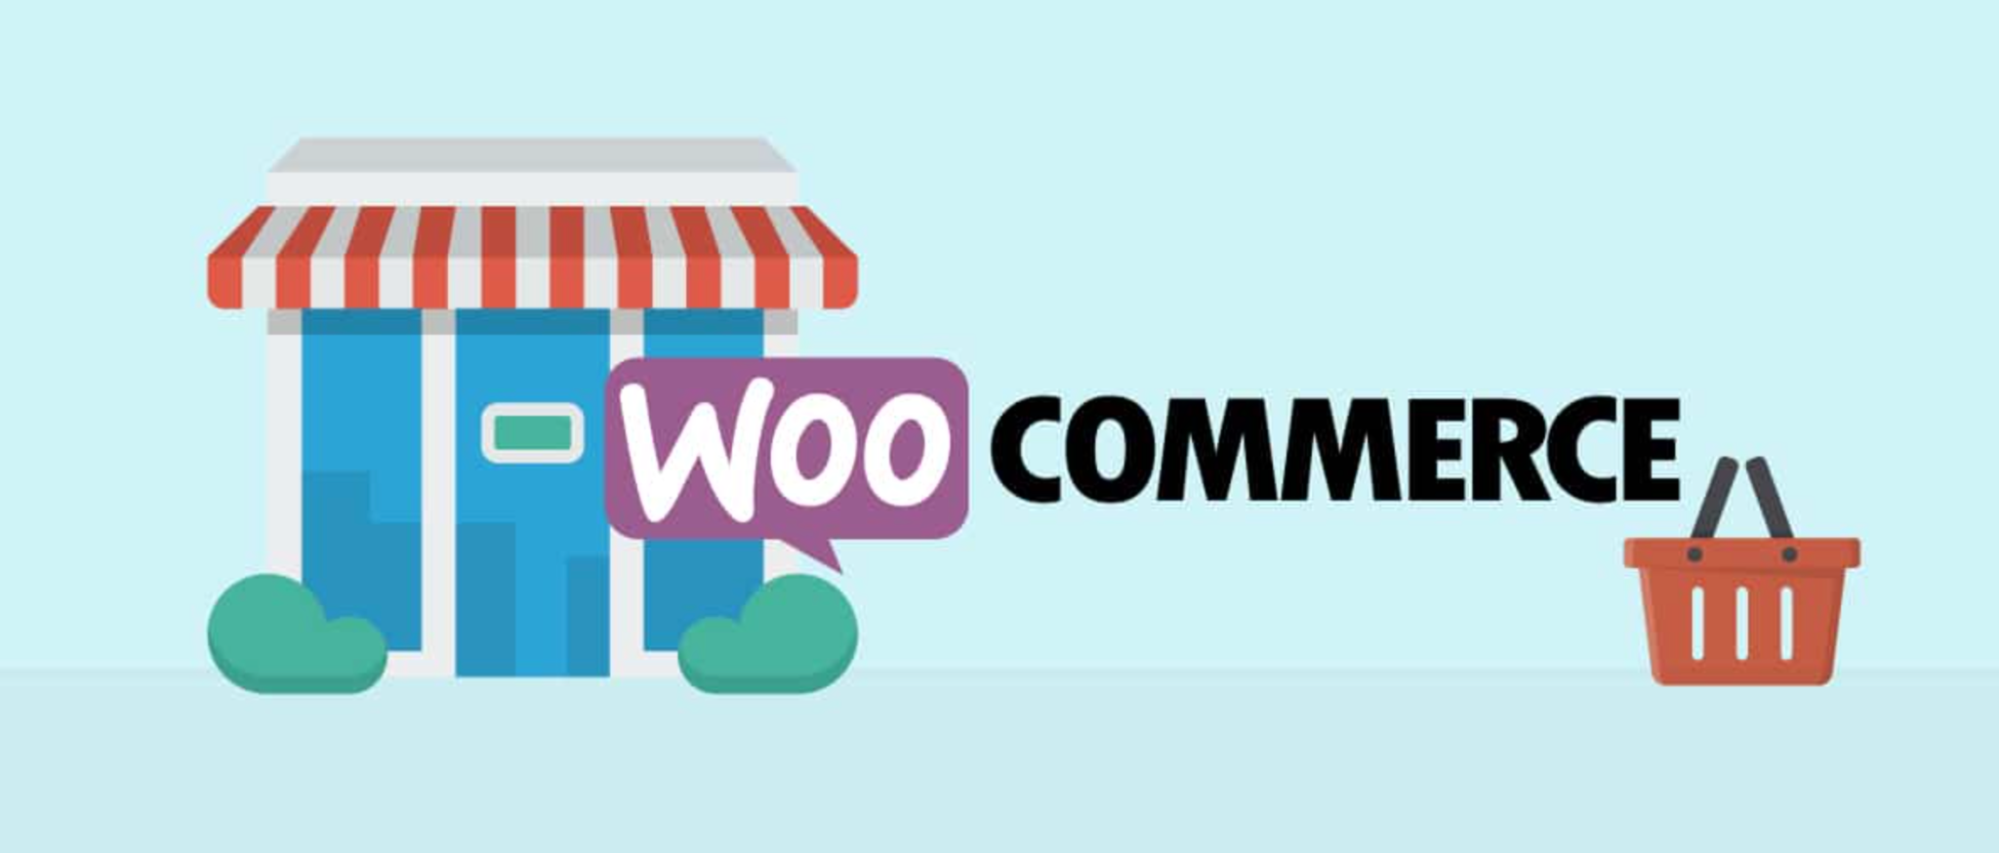 How to Make an Ecommerce Website with WordPress in 2022